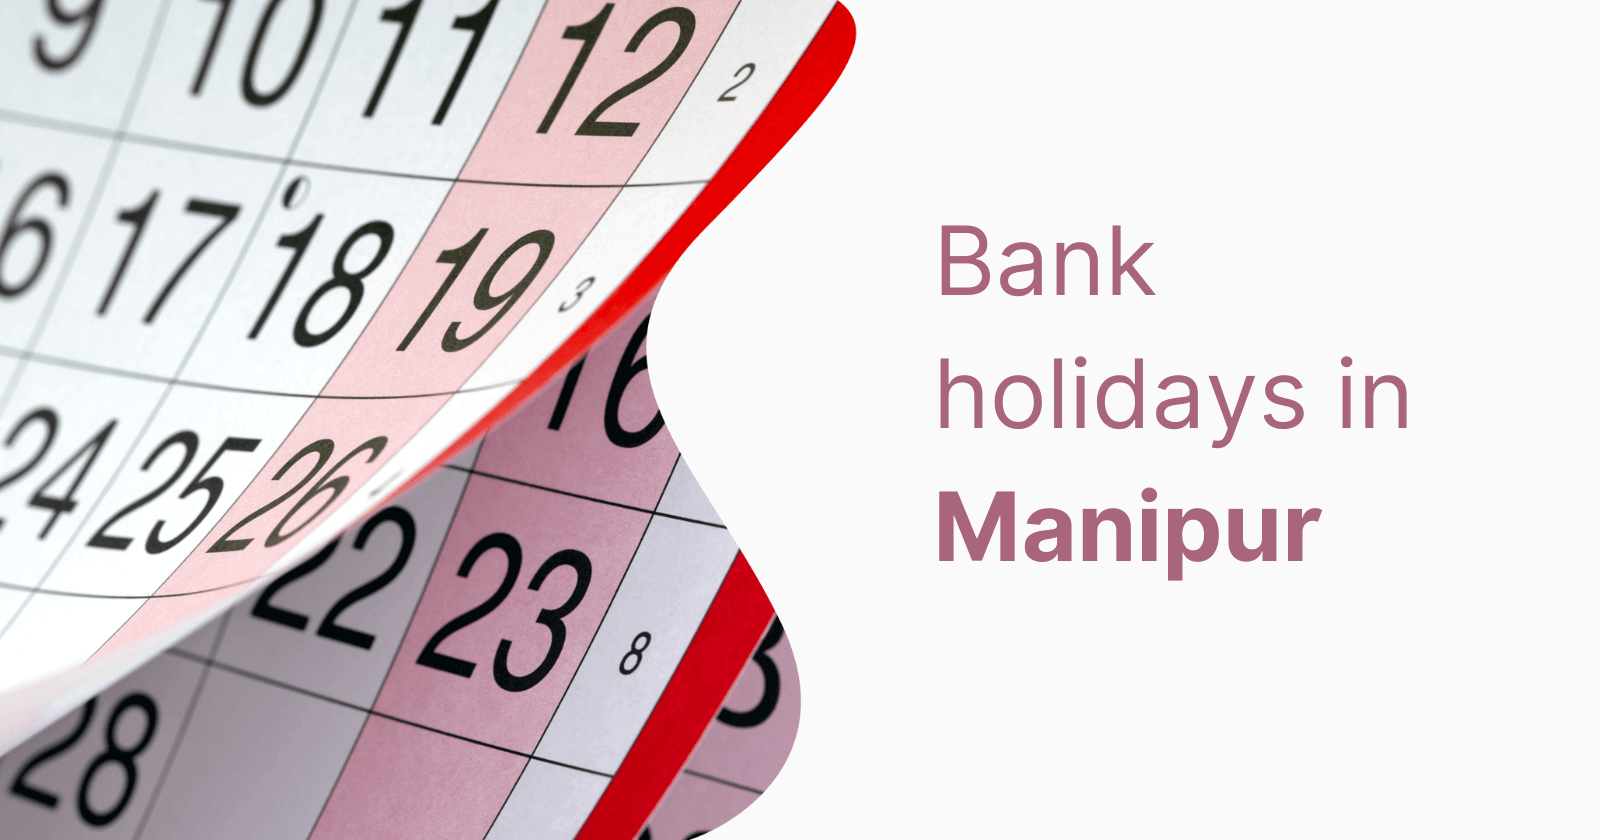 Manipur Holidays: List of Bank Holidays in Manipur in 2023